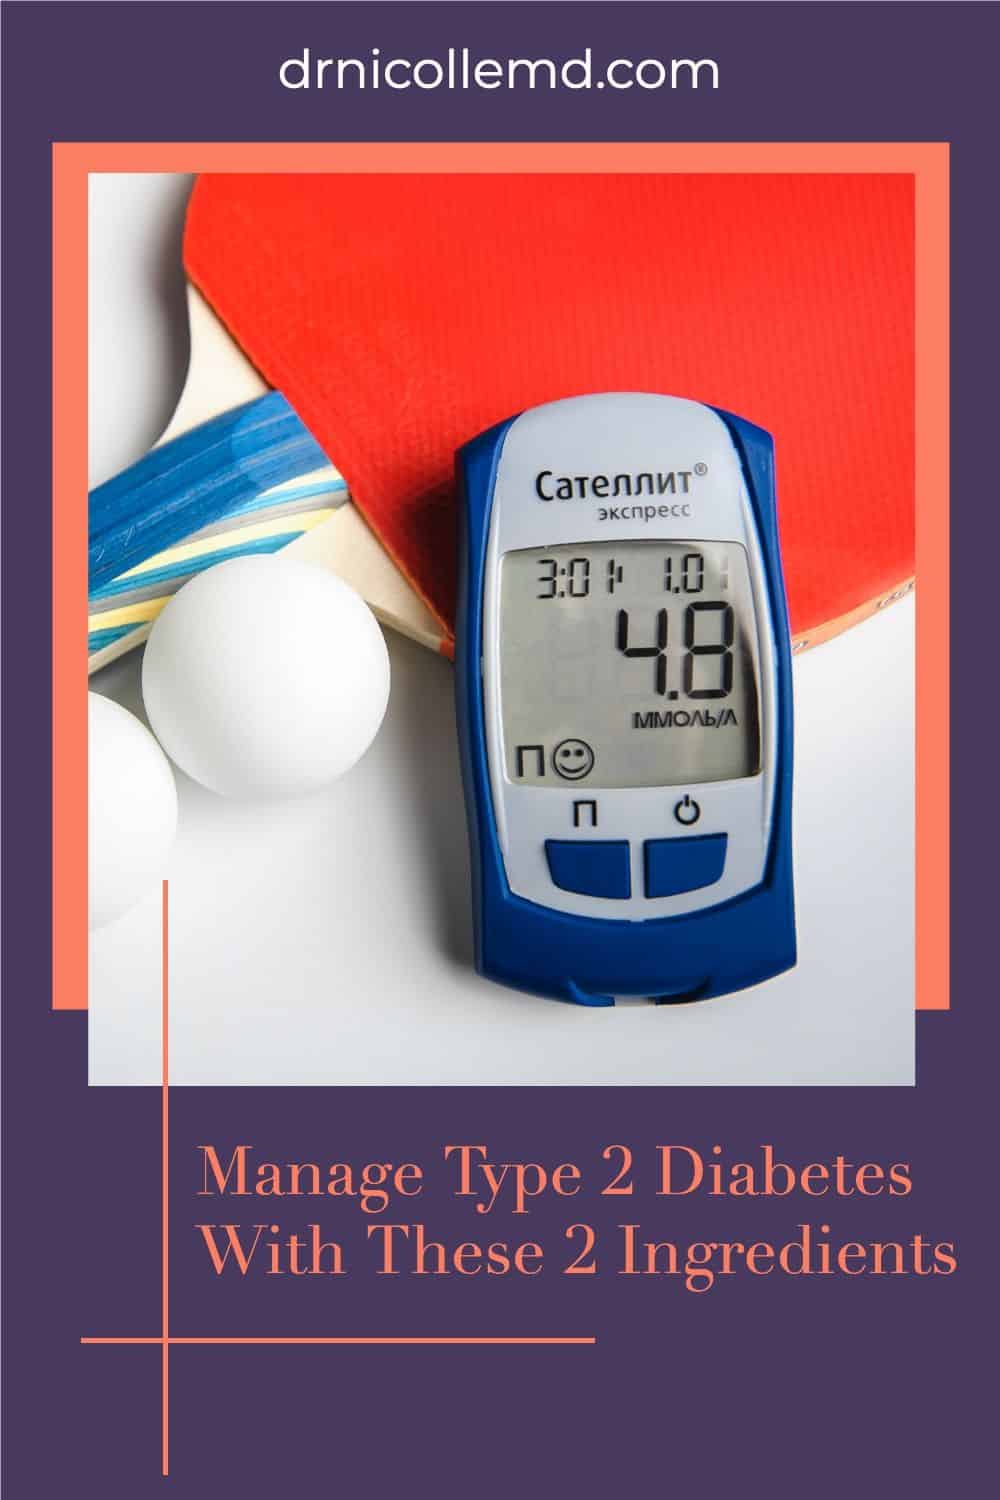 Scientists Discover 2 Ingredients That Help You Manage Type 2 Diabetes